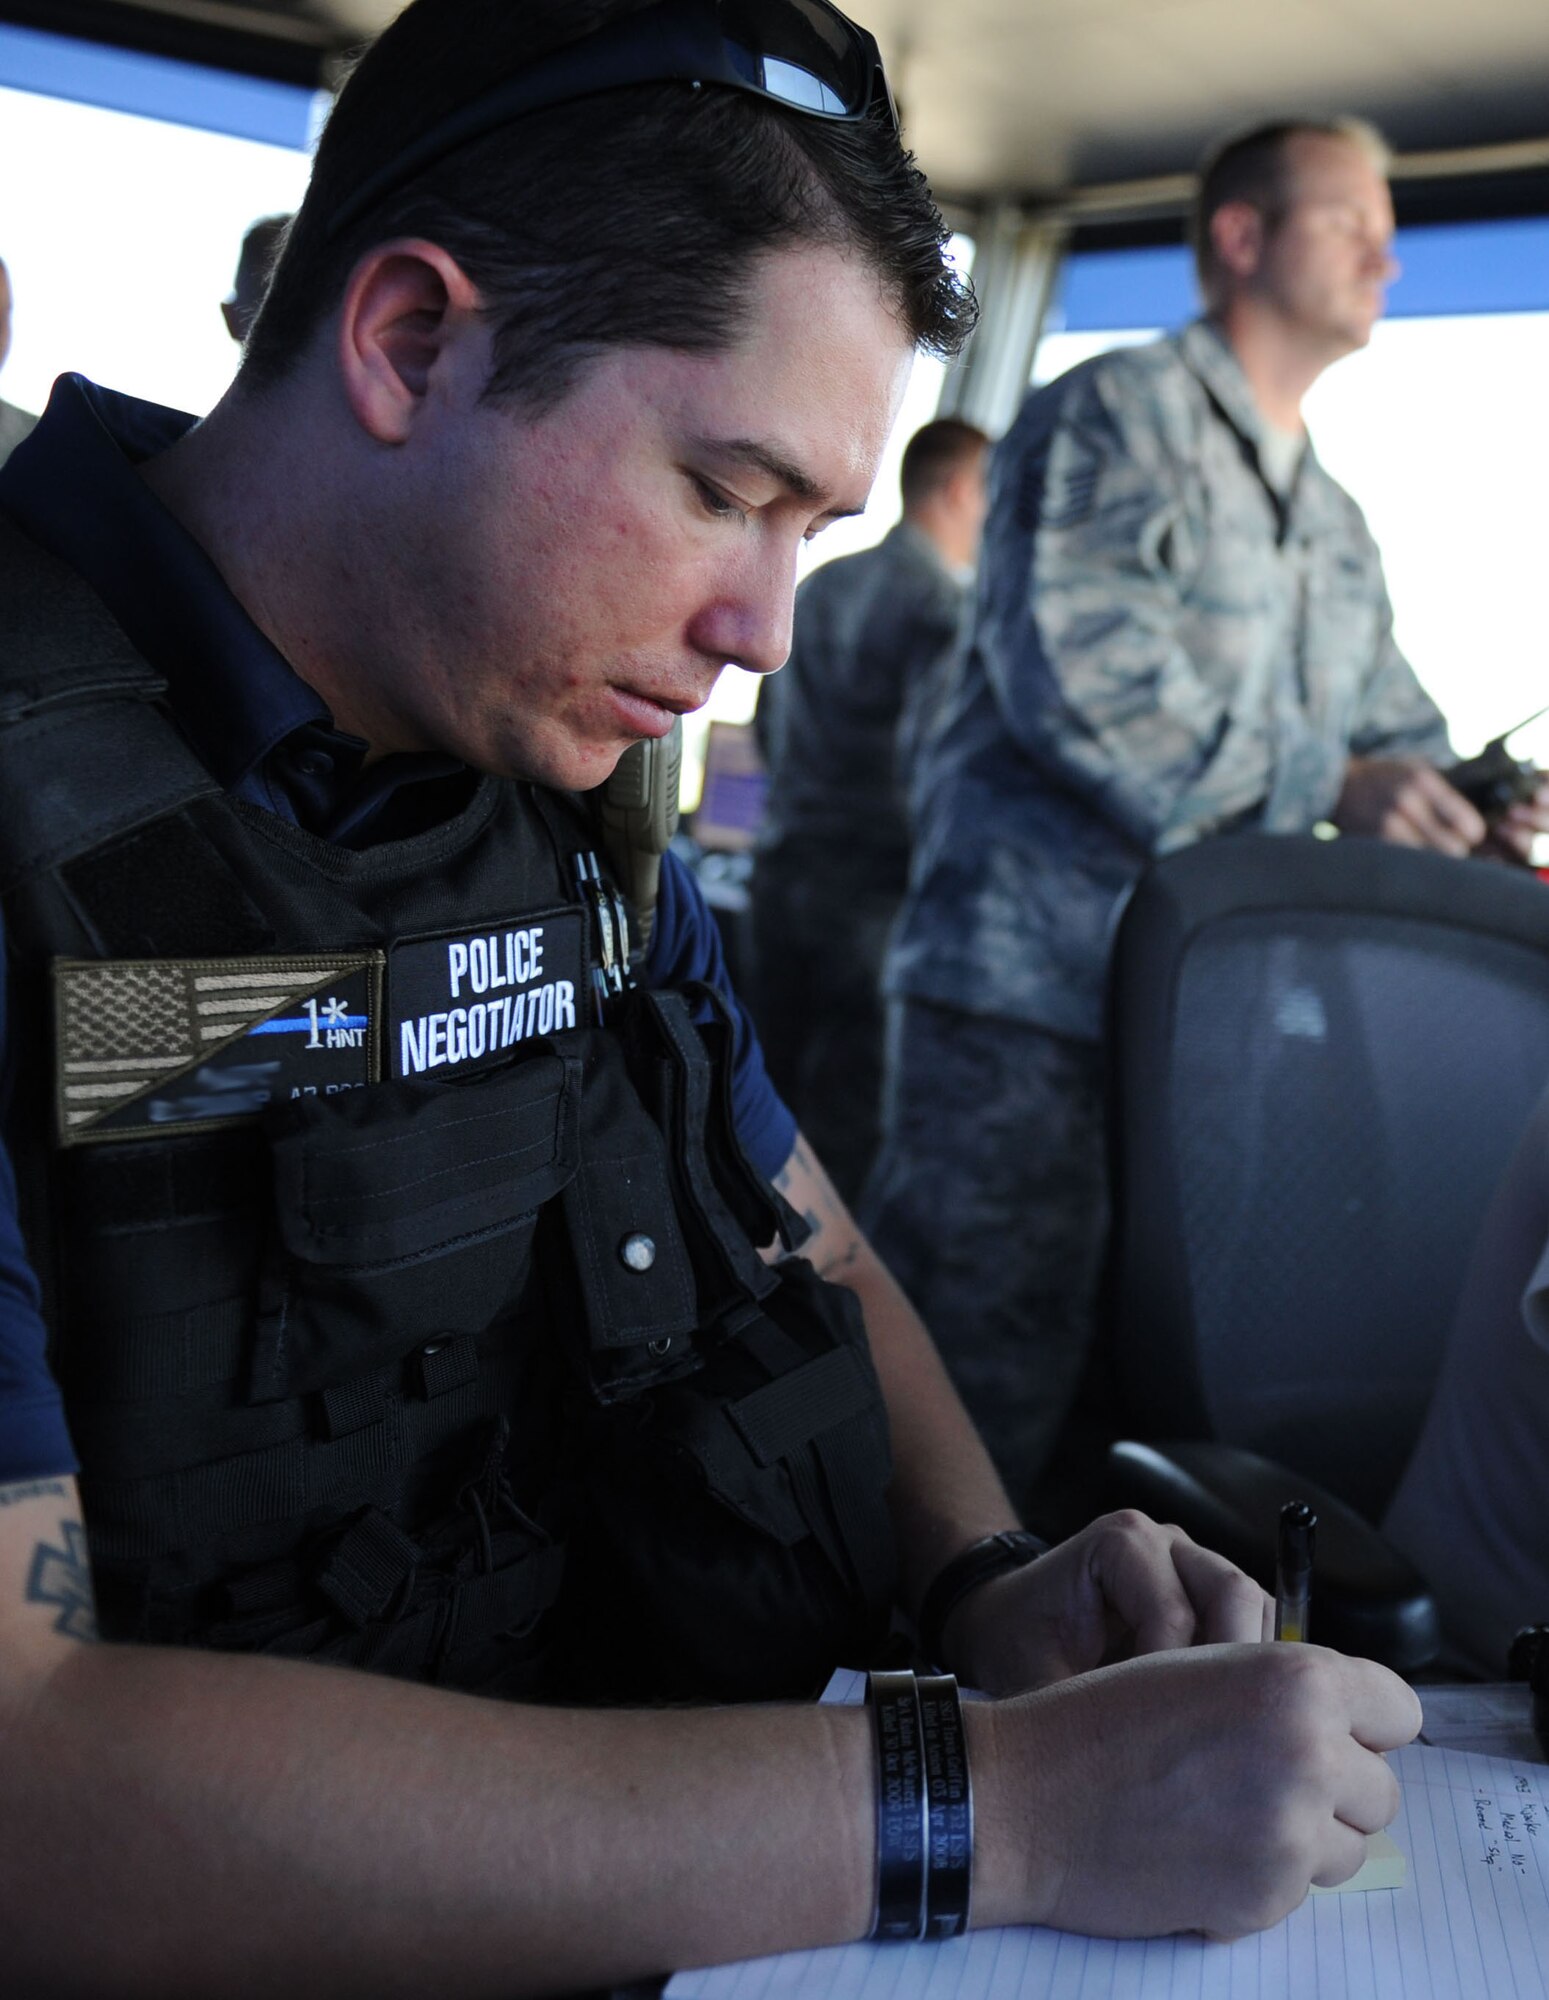 An 81st Security Forces Squadron police officer supervisor attempts to negotiate with a WC-130J Super Hercules “hijacker” during an anti-hijacking exercise on the flightline July 21, 2016, on Keesler Air Force Base, Miss. The exercise was used to test and maintain the ability of Keesler units to react and respond to developing situations. (U.S. Air Force photo by Kemberly Groue/Released)